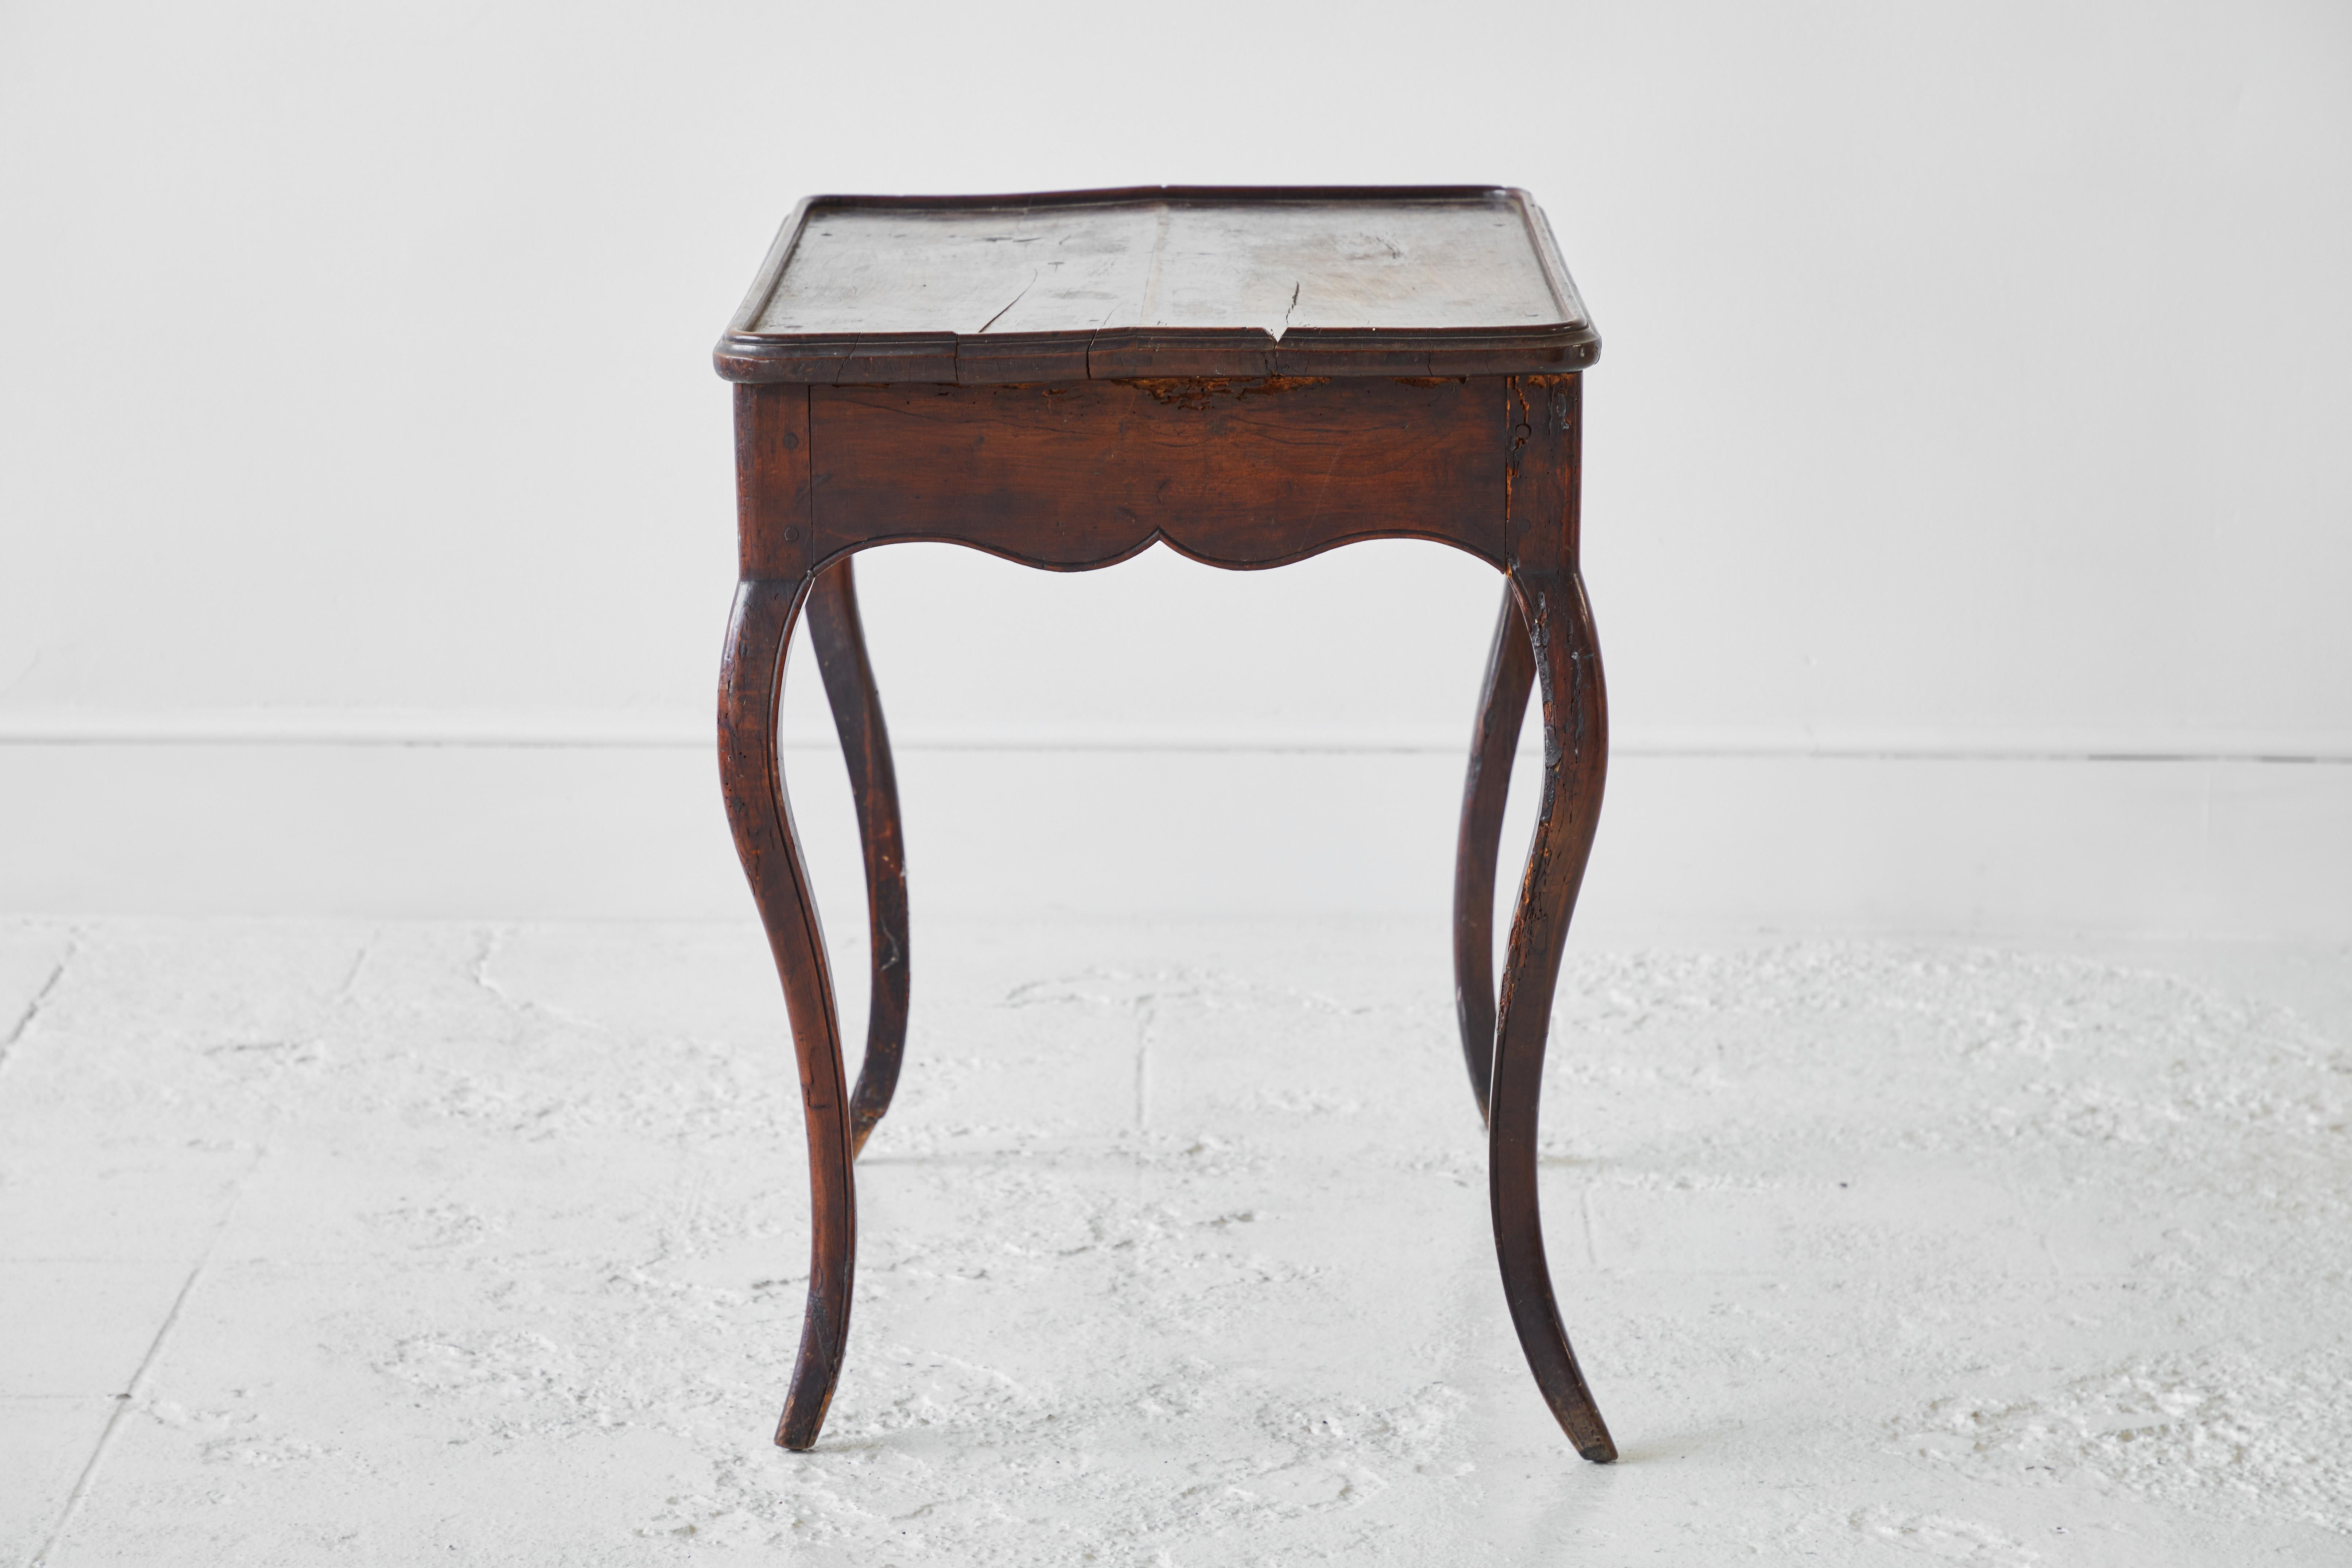 20th Century Italian Scrolled Leg Side Table with Single Drawer